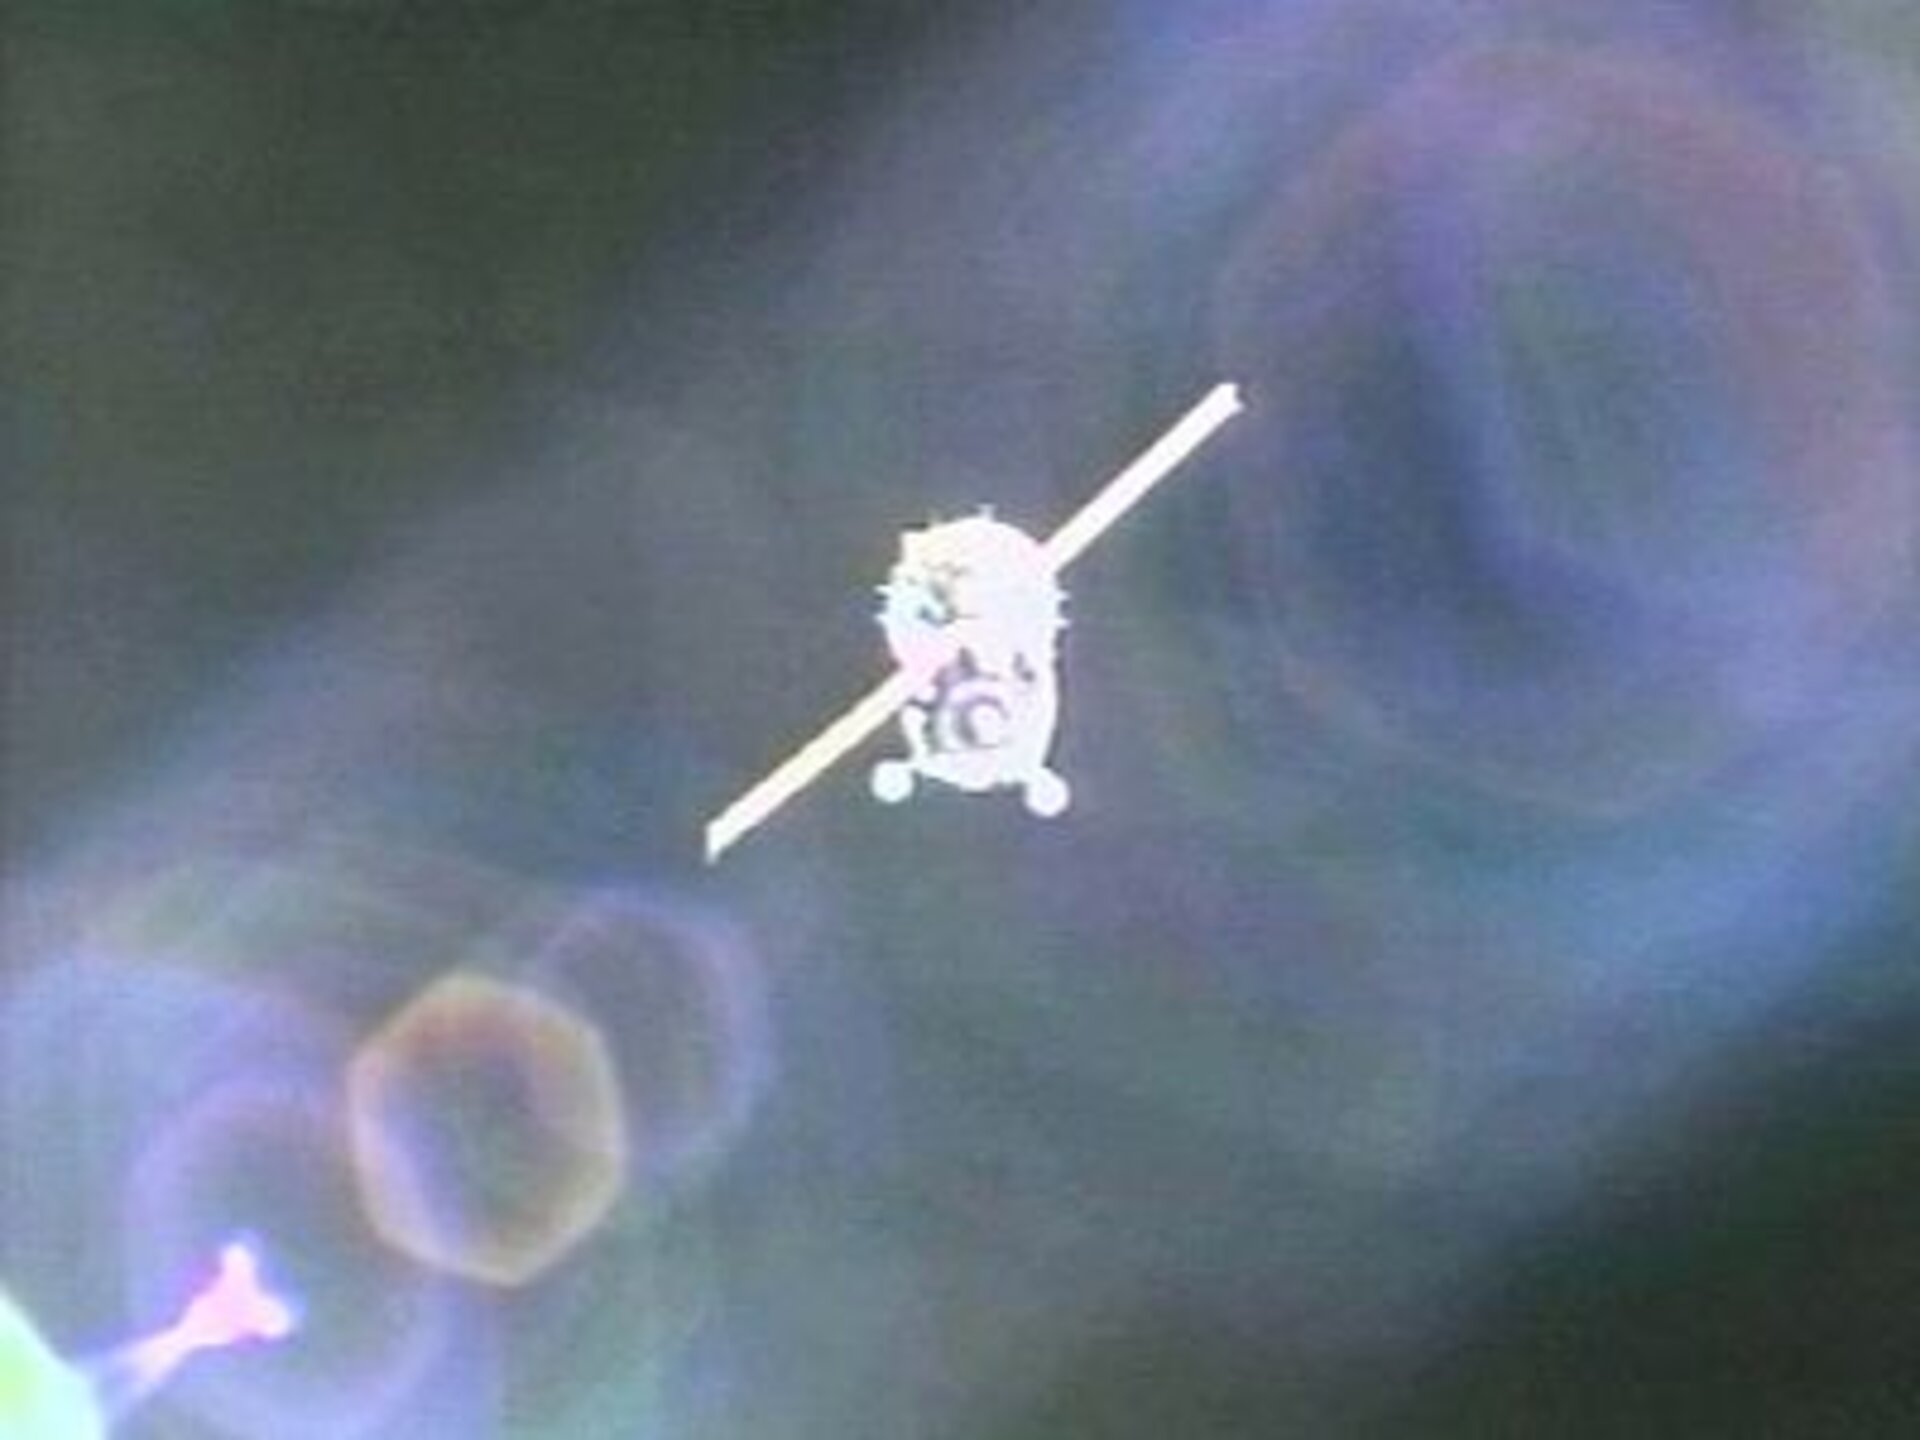 The Soyuz TMA-3 approaches ISS prior to docking